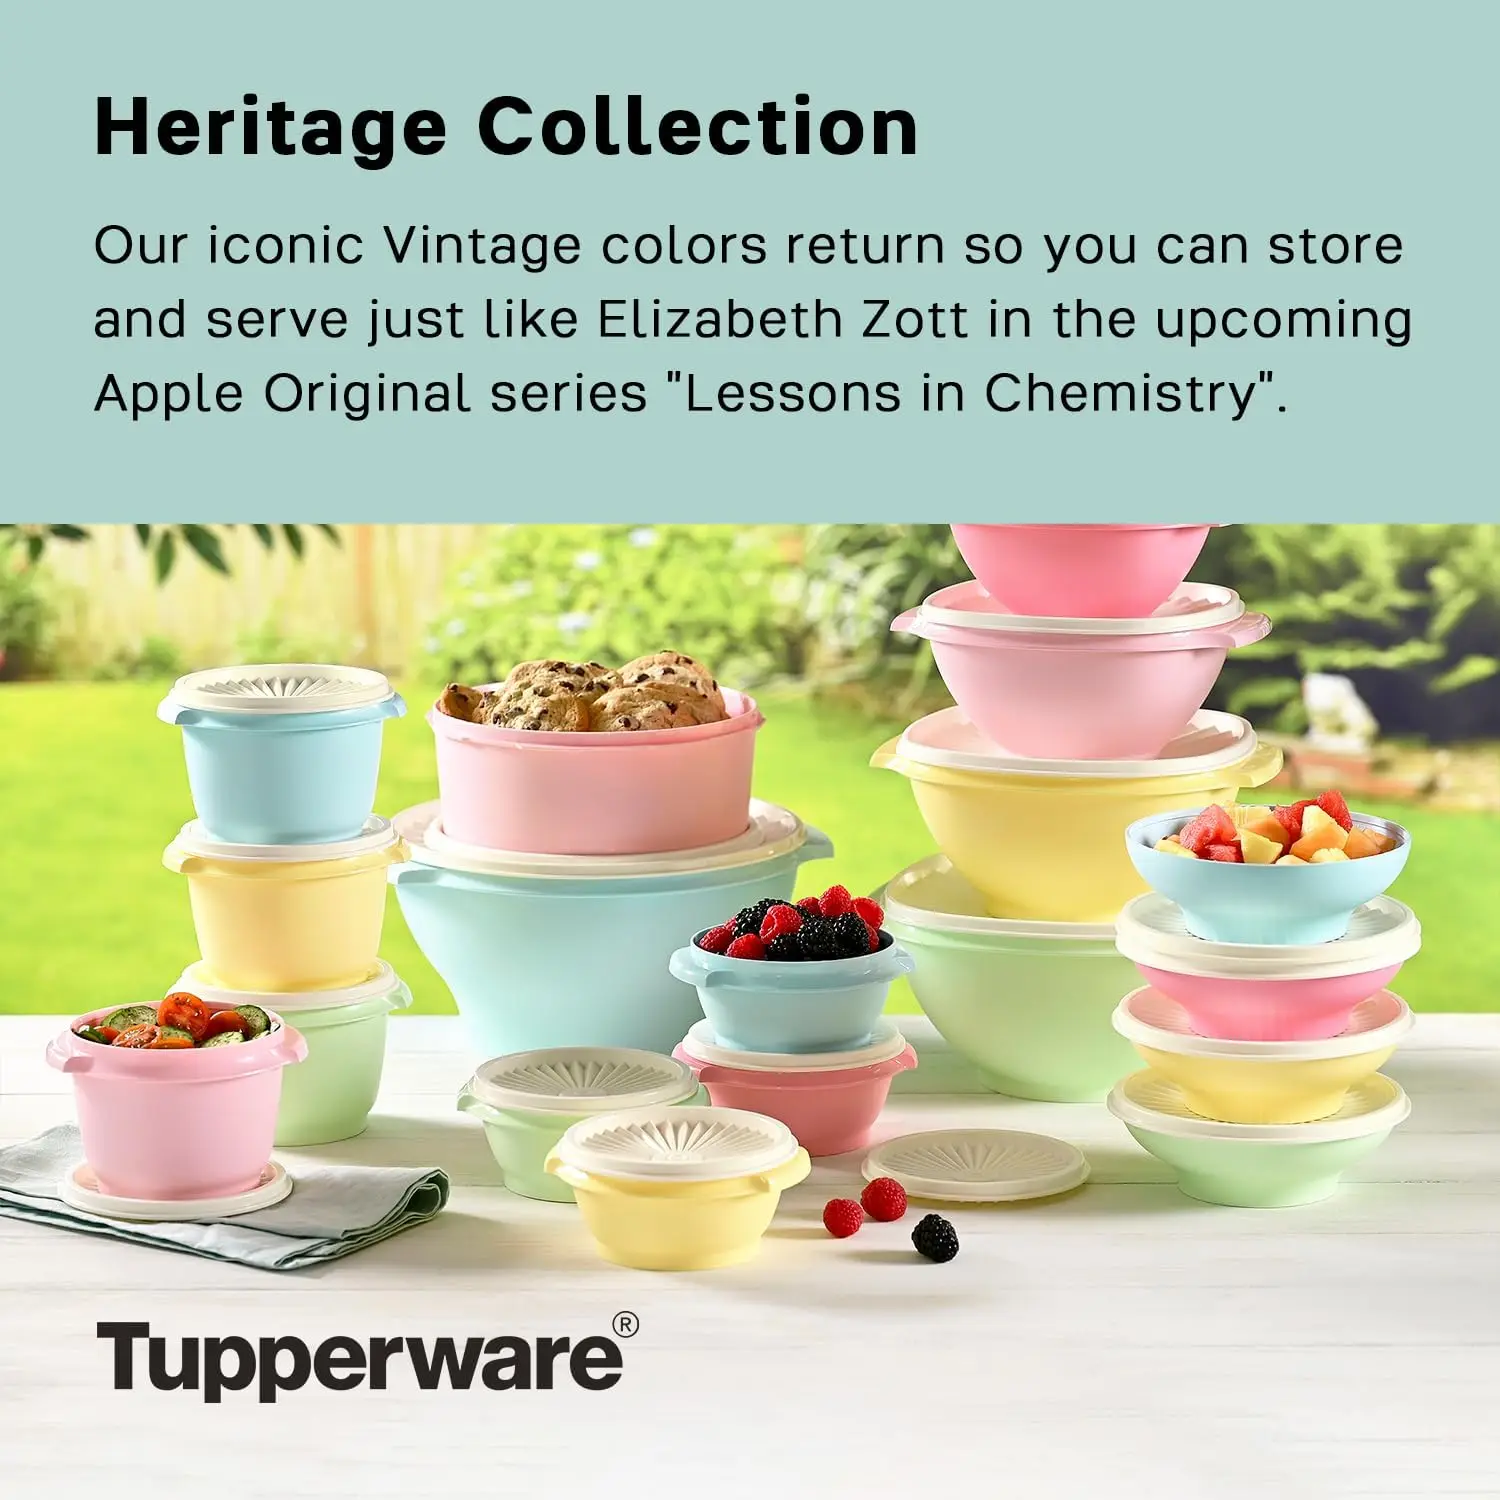 https://ae01.alicdn.com/kf/S4f71744873a1468ebe38b8154c7557ddl/Heritage-Collection-36-Piece-Food-Storage-Container-Set-in-Vintage-Colors-Dishwasher-Safe-BPA-Free-18.jpg